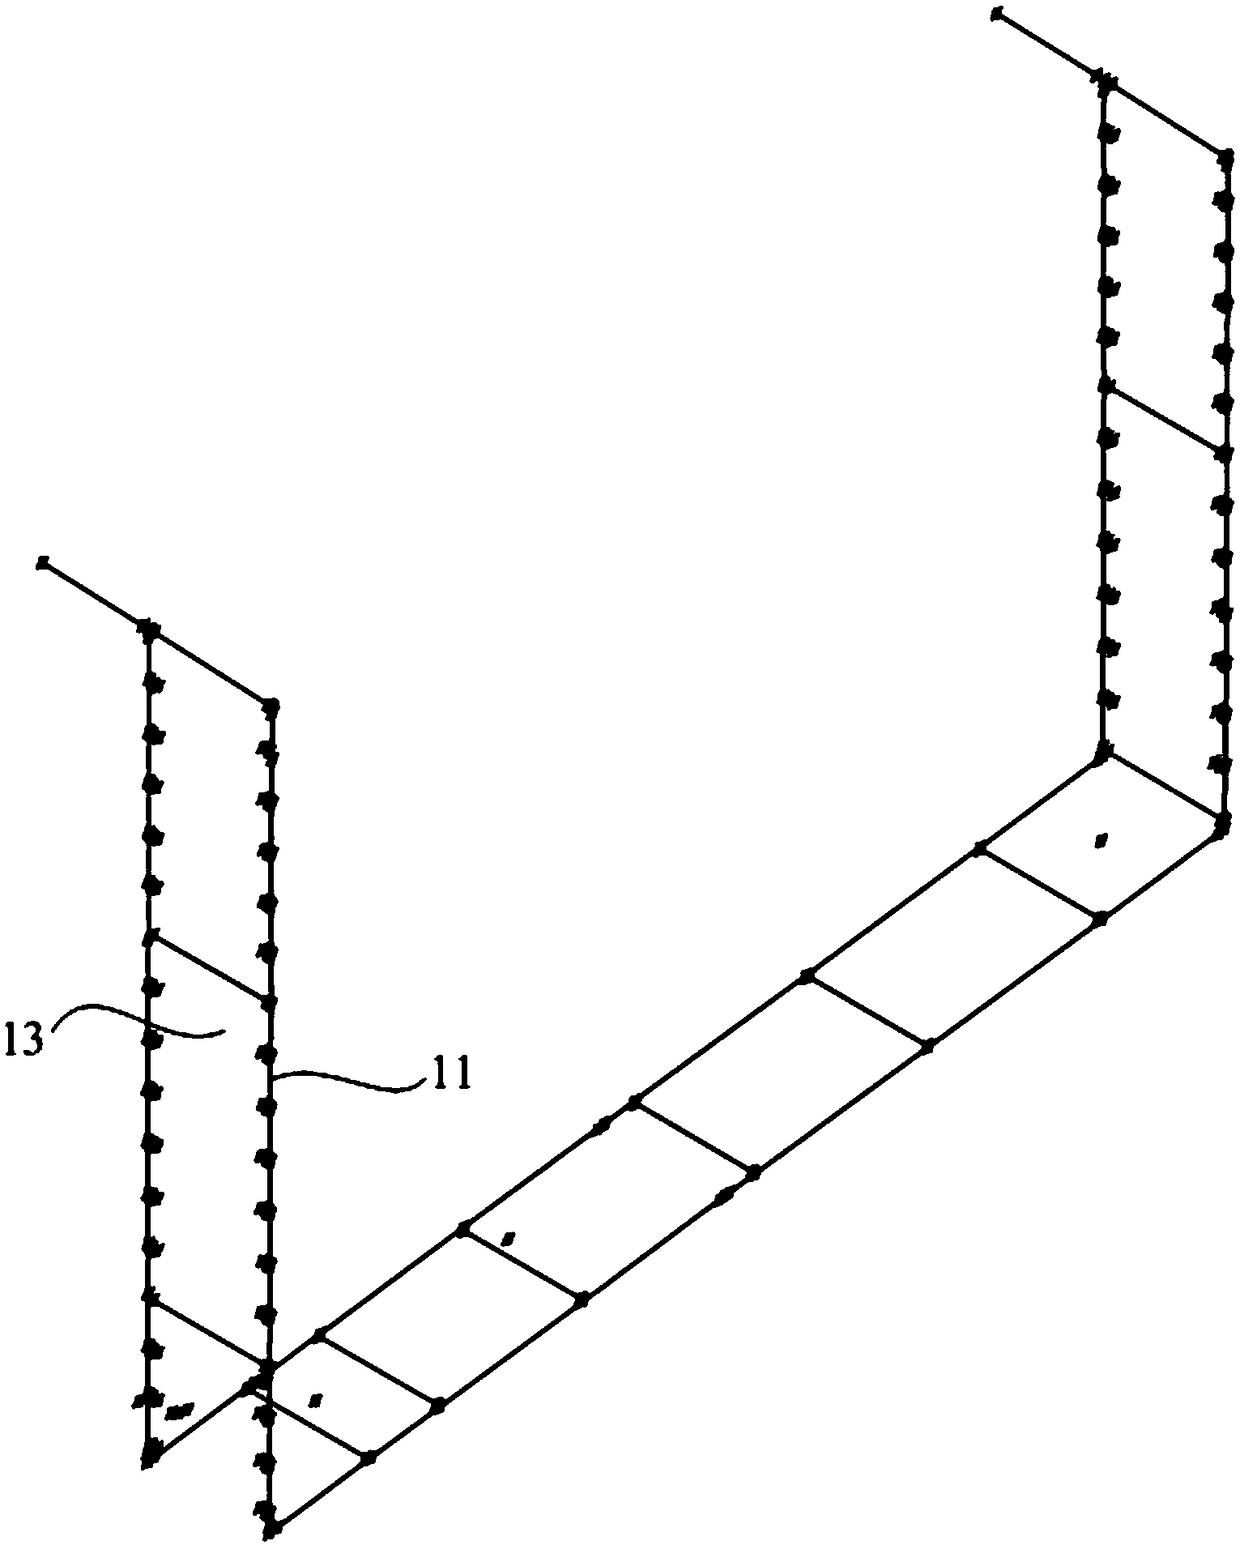 A measurement method for simulated loading of a ship in the large closing stage